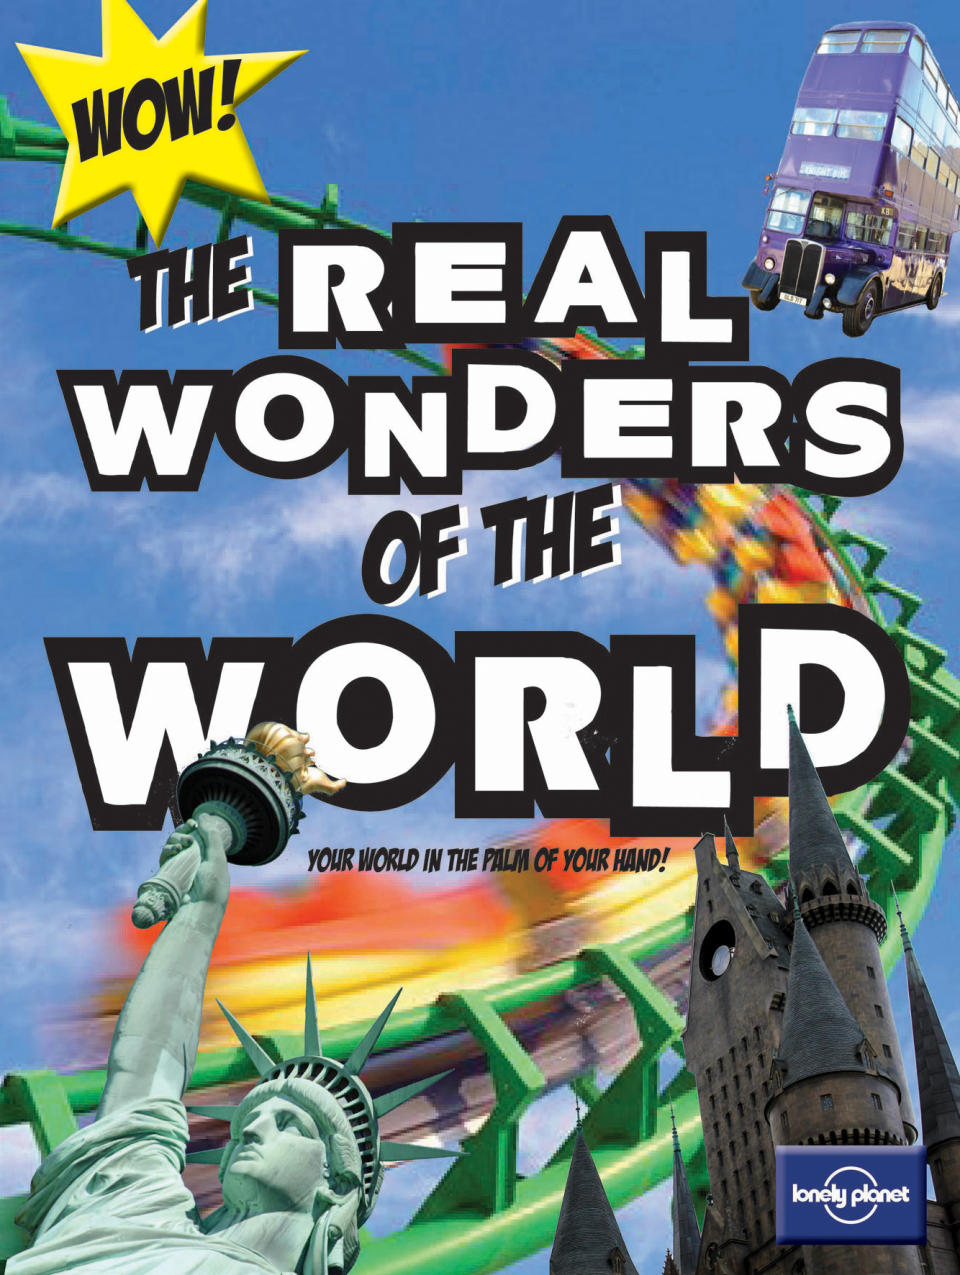 This image provided by Lonely Planet shows the cover of the travel guidebook company’s book, “The Real Wonders of the World.” The book is from Lonely Planet’s “Not-For-Parents” series, and introduces young readers to cool places from the Great Pyramid of Giza to New Zealand’s “Lord of the Rings” locations. (AP Photo/Lonely Planet)